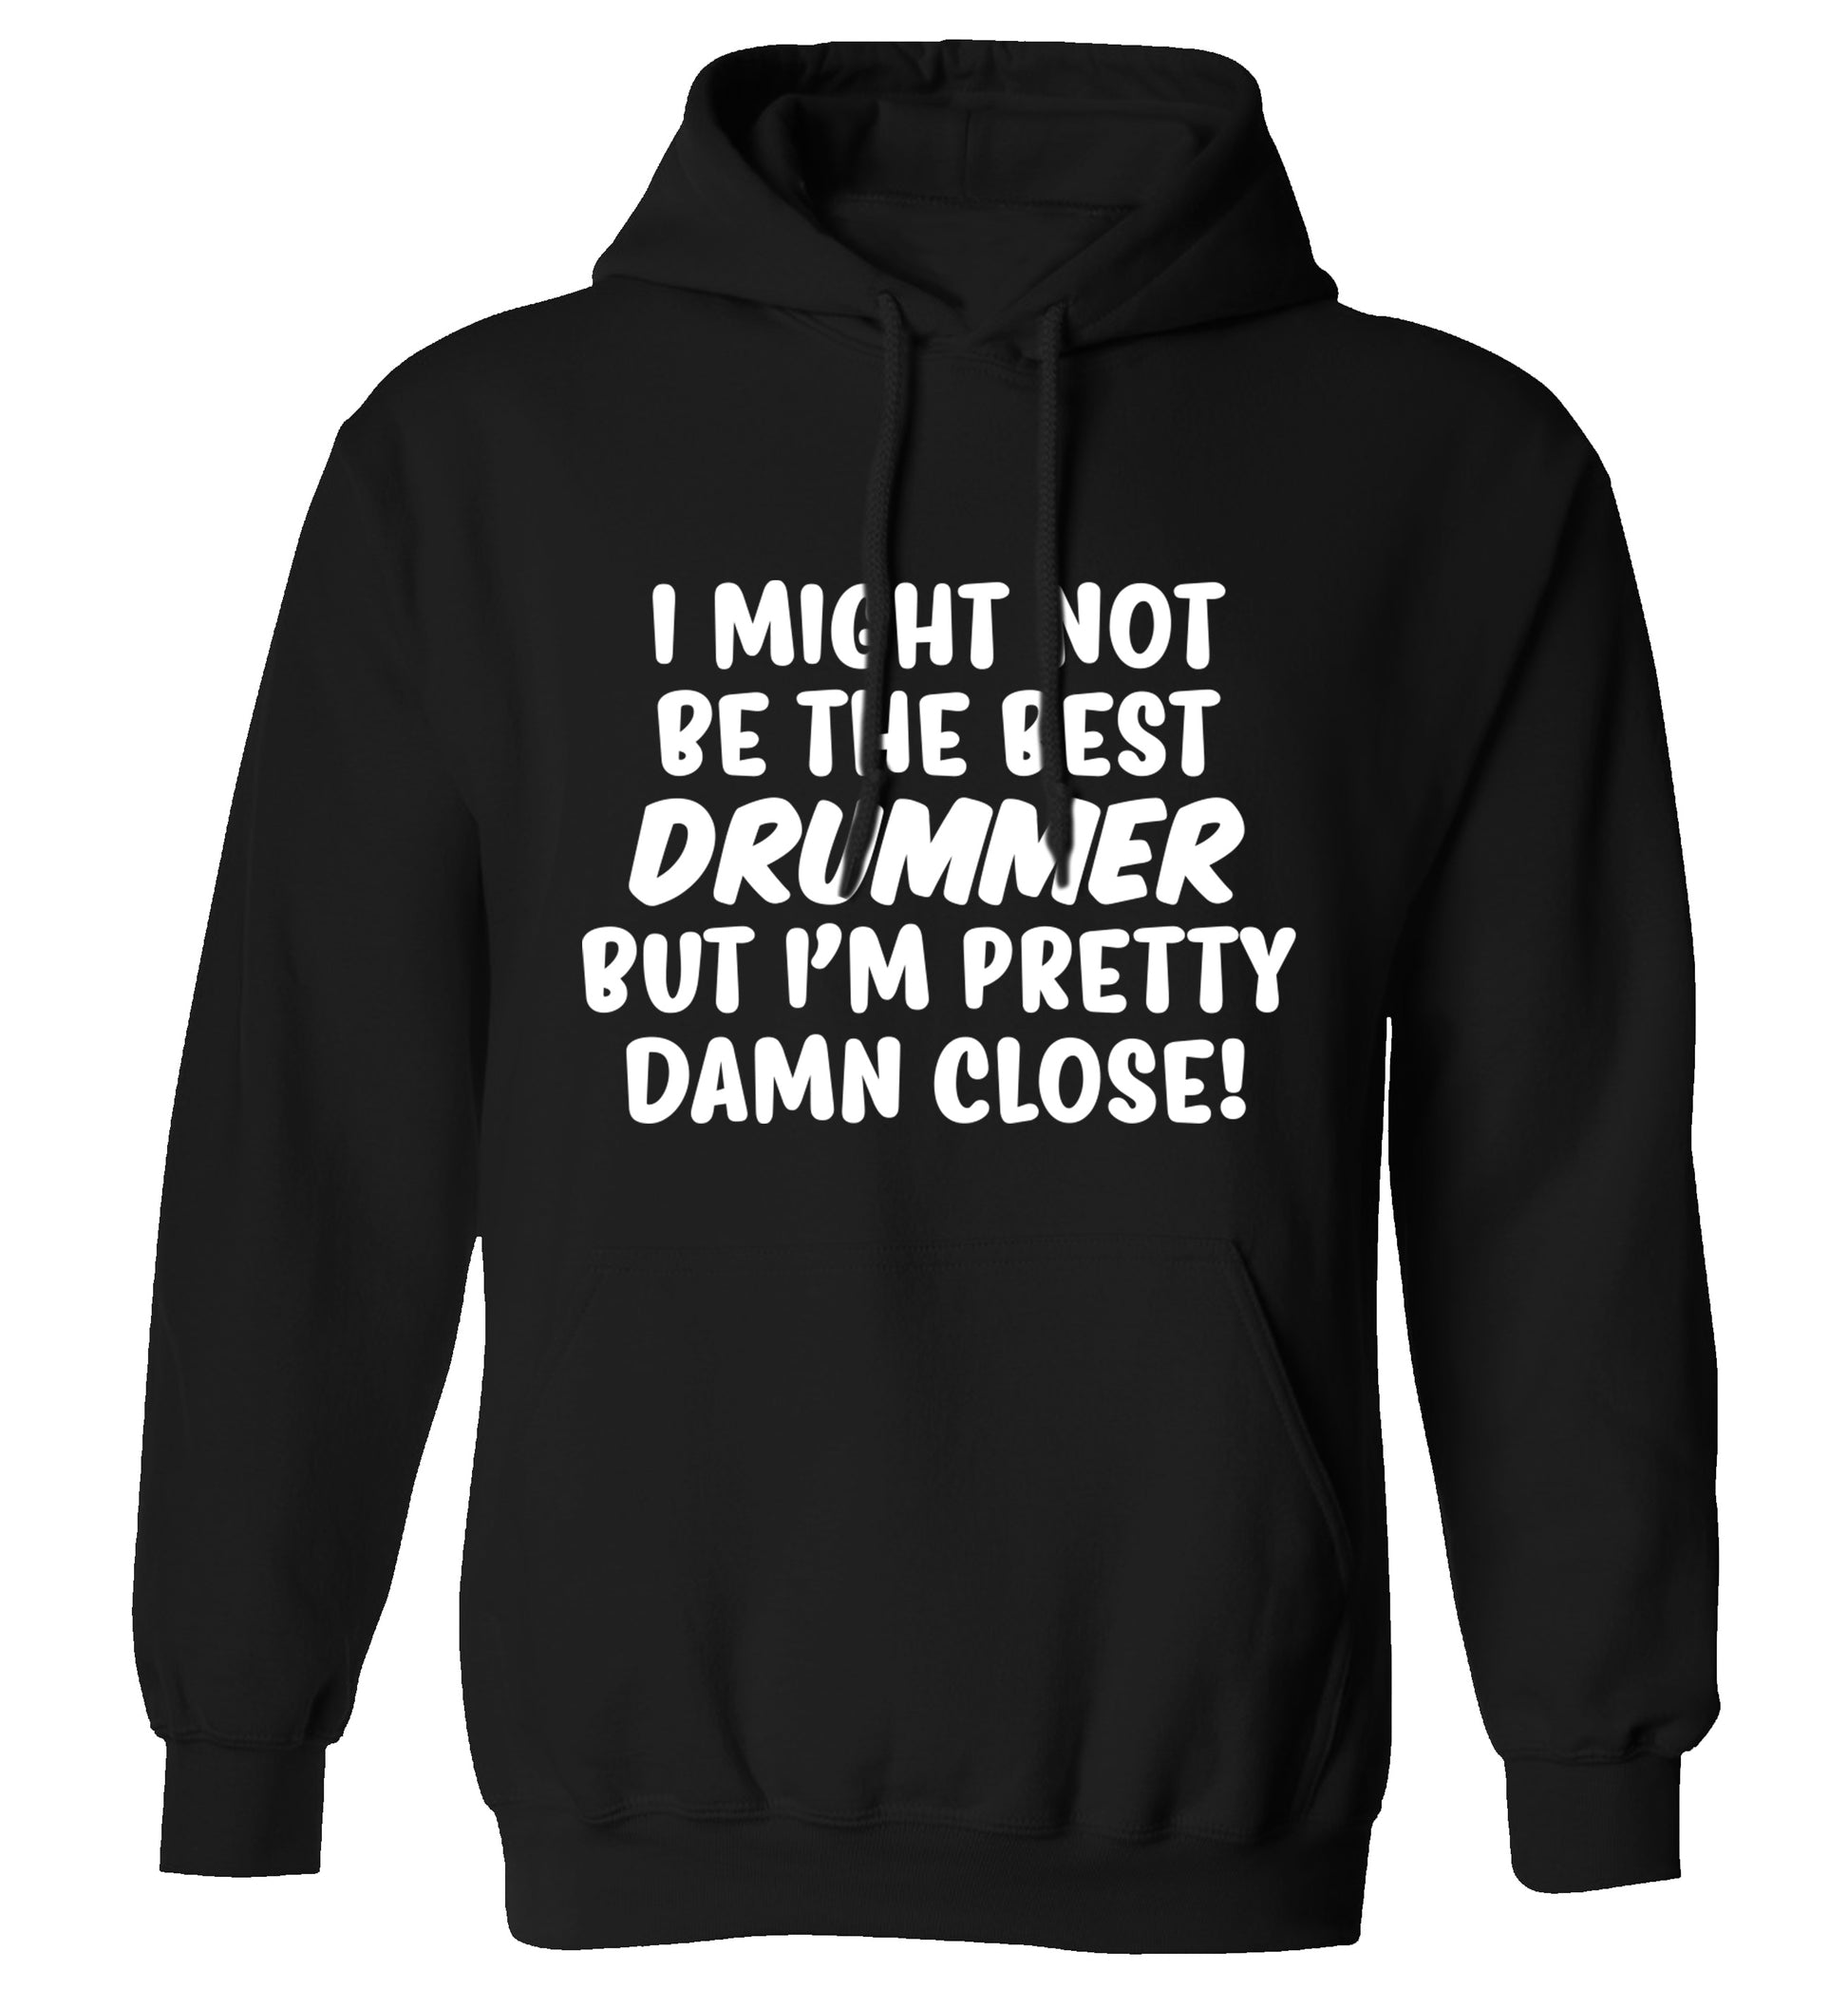 I might not be the best drummer but I'm pretty close! adults unisexblack hoodie 2XL